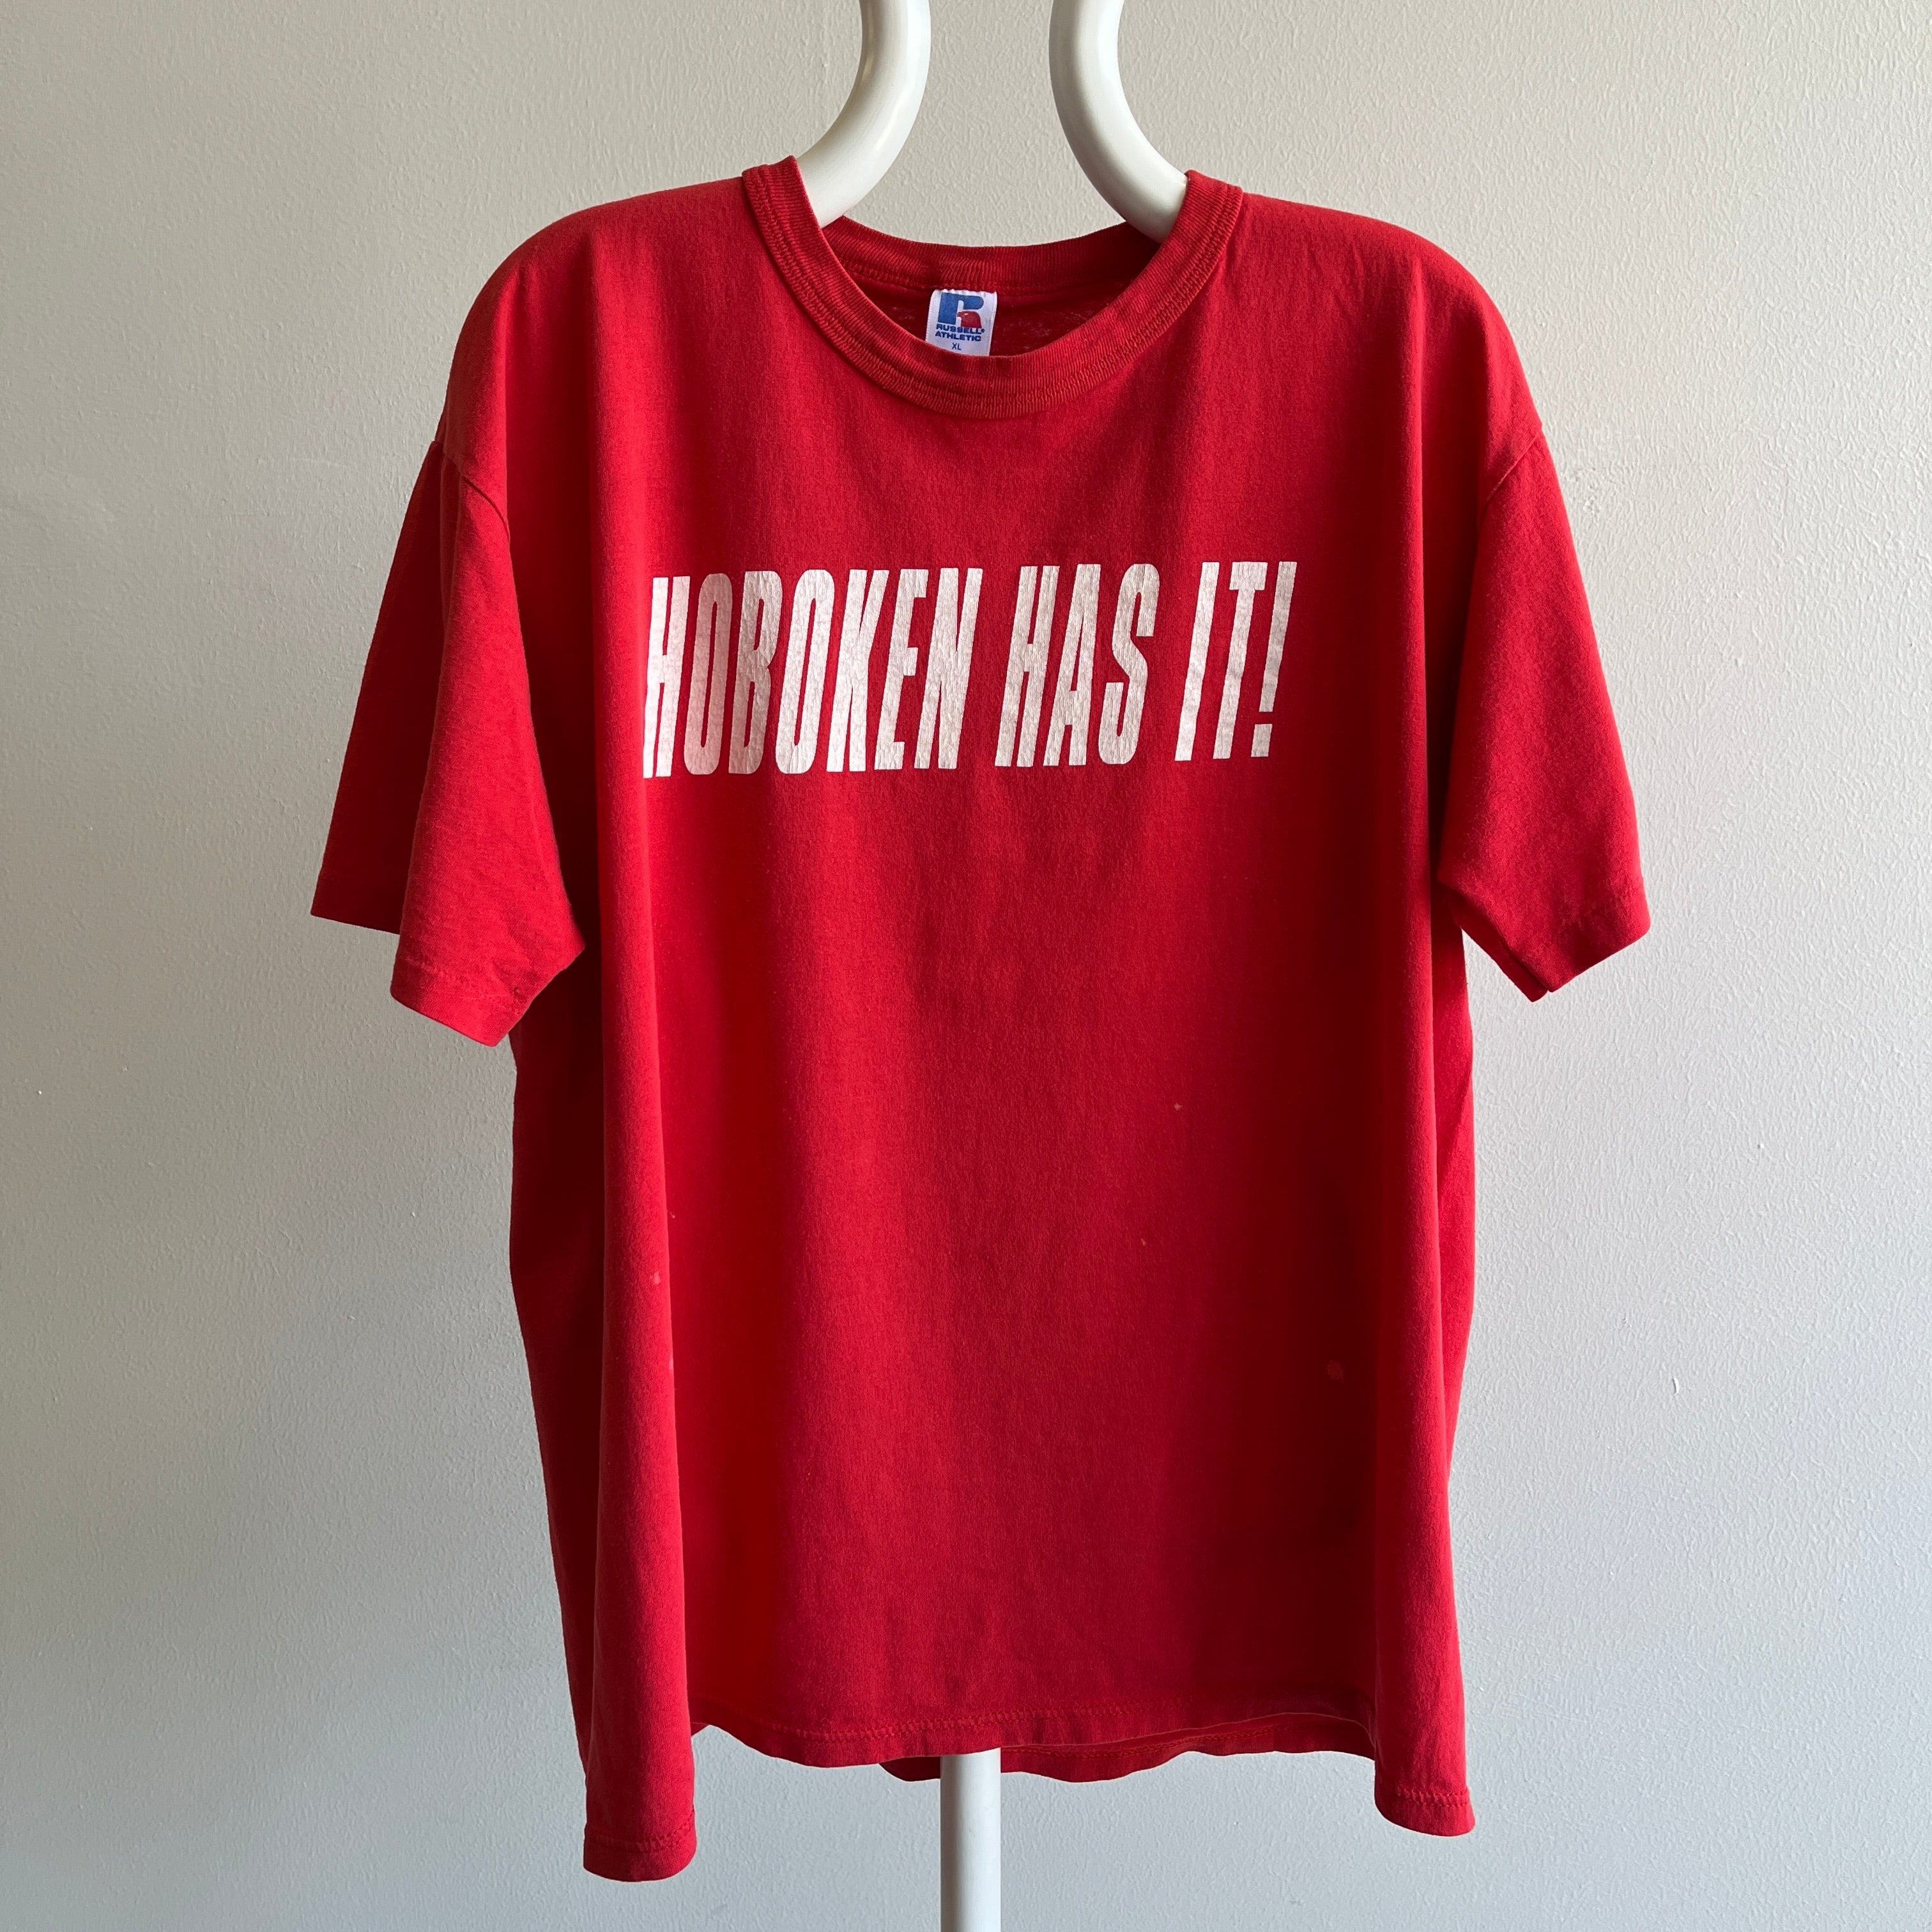 1990s Hoboken Has It! Cotton T-Shirt by Russell